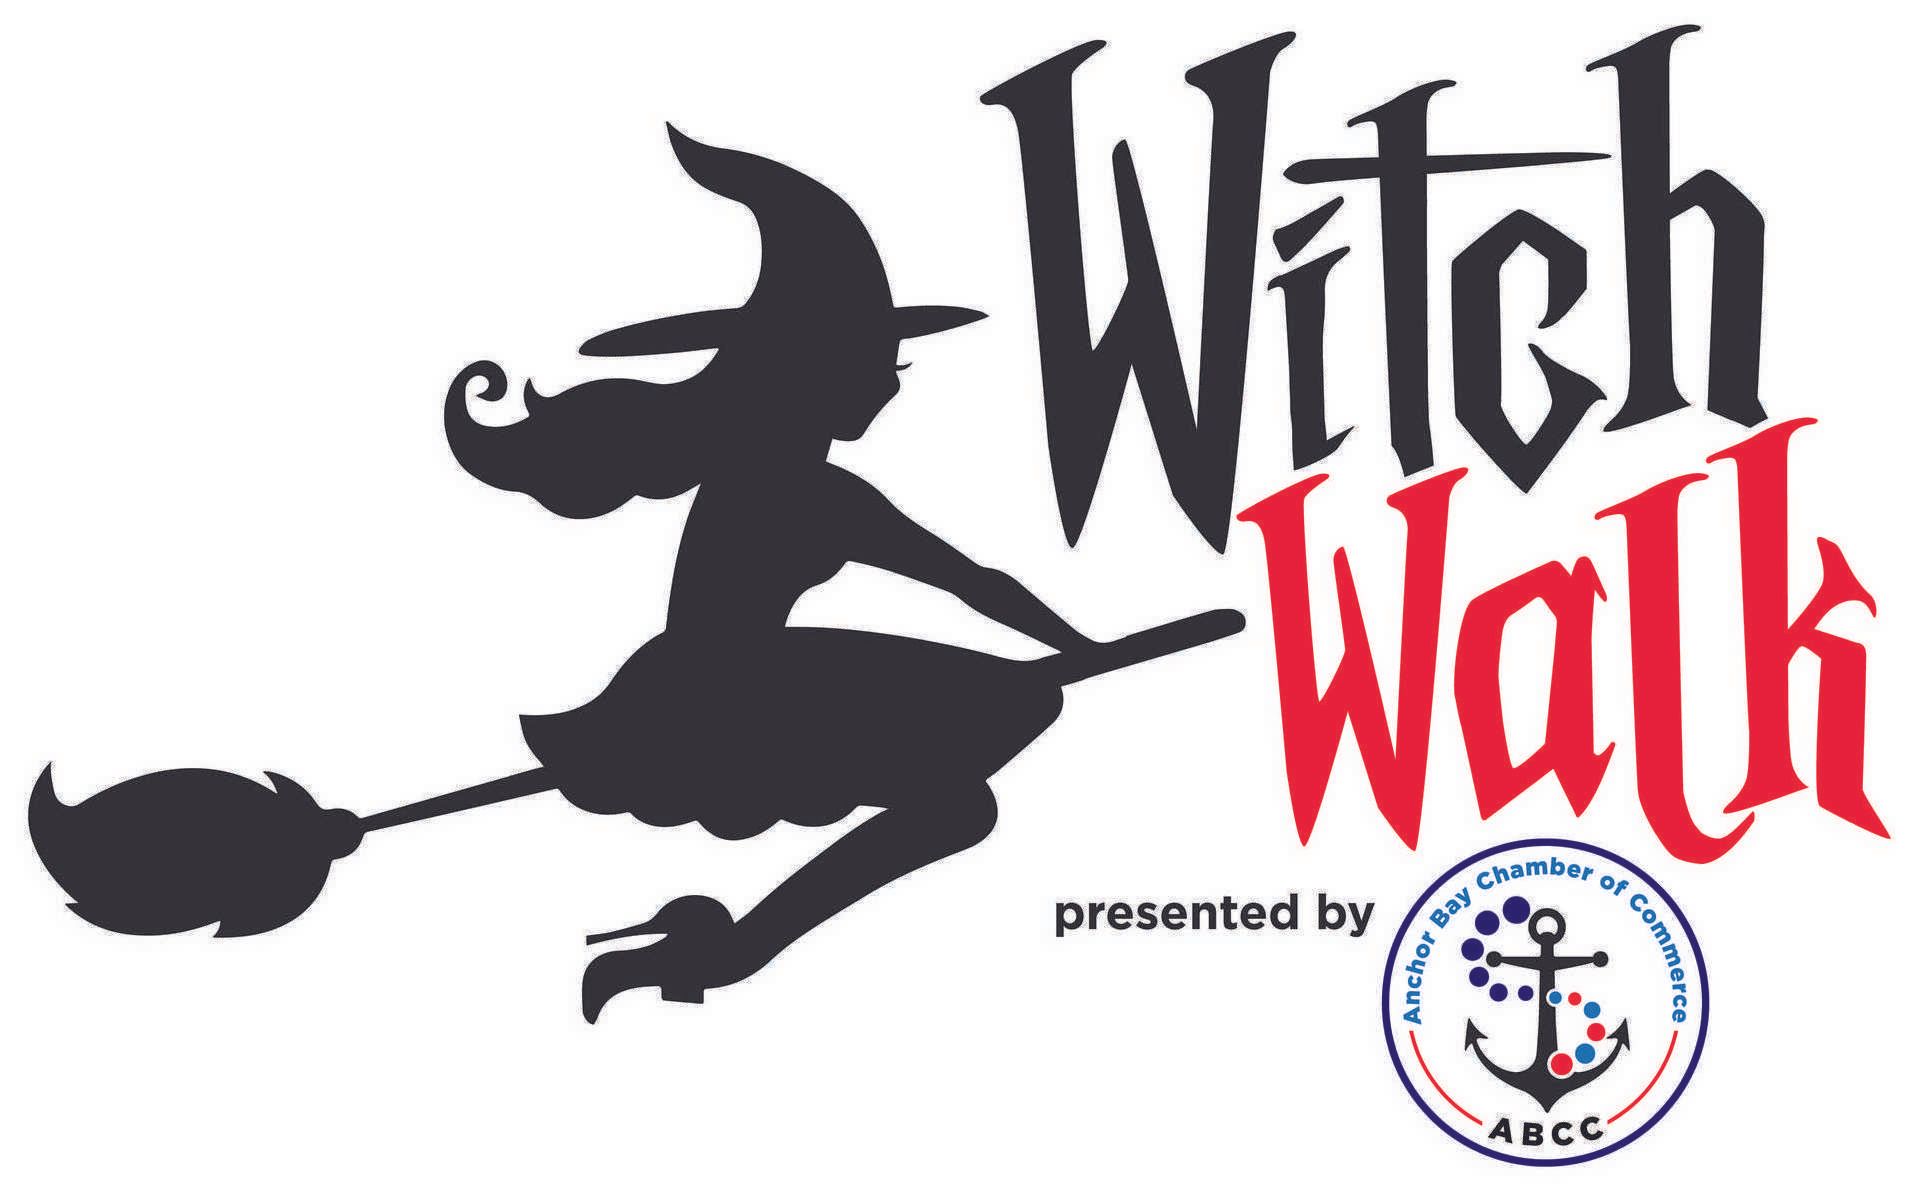 A witch walk logo with a silhouette of a witch on a broom